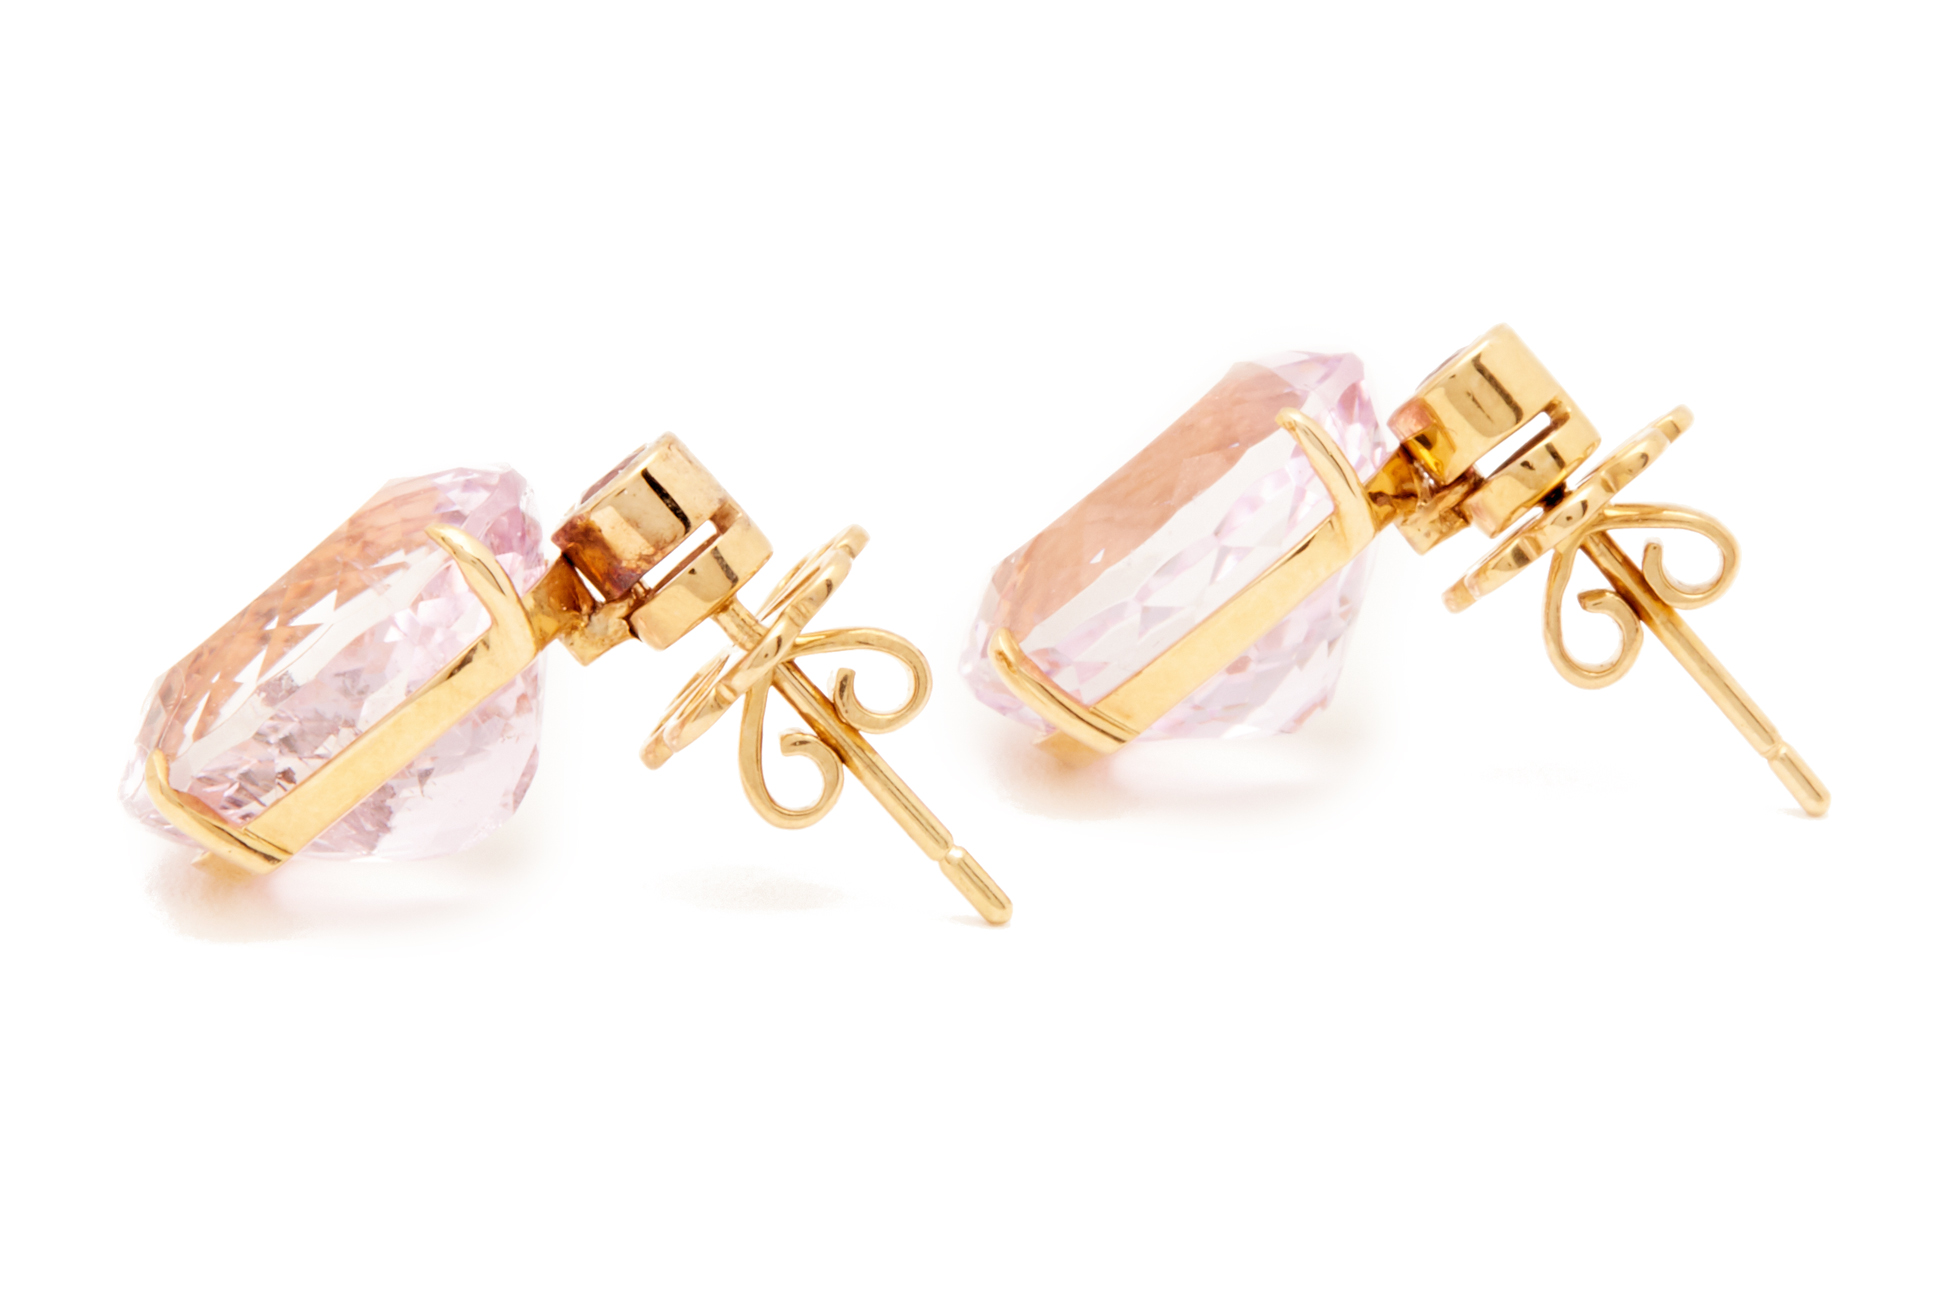 A PAIR OF KUNZITE AND PINK SAPPHIRE STUD EARRINGS - Image 2 of 3